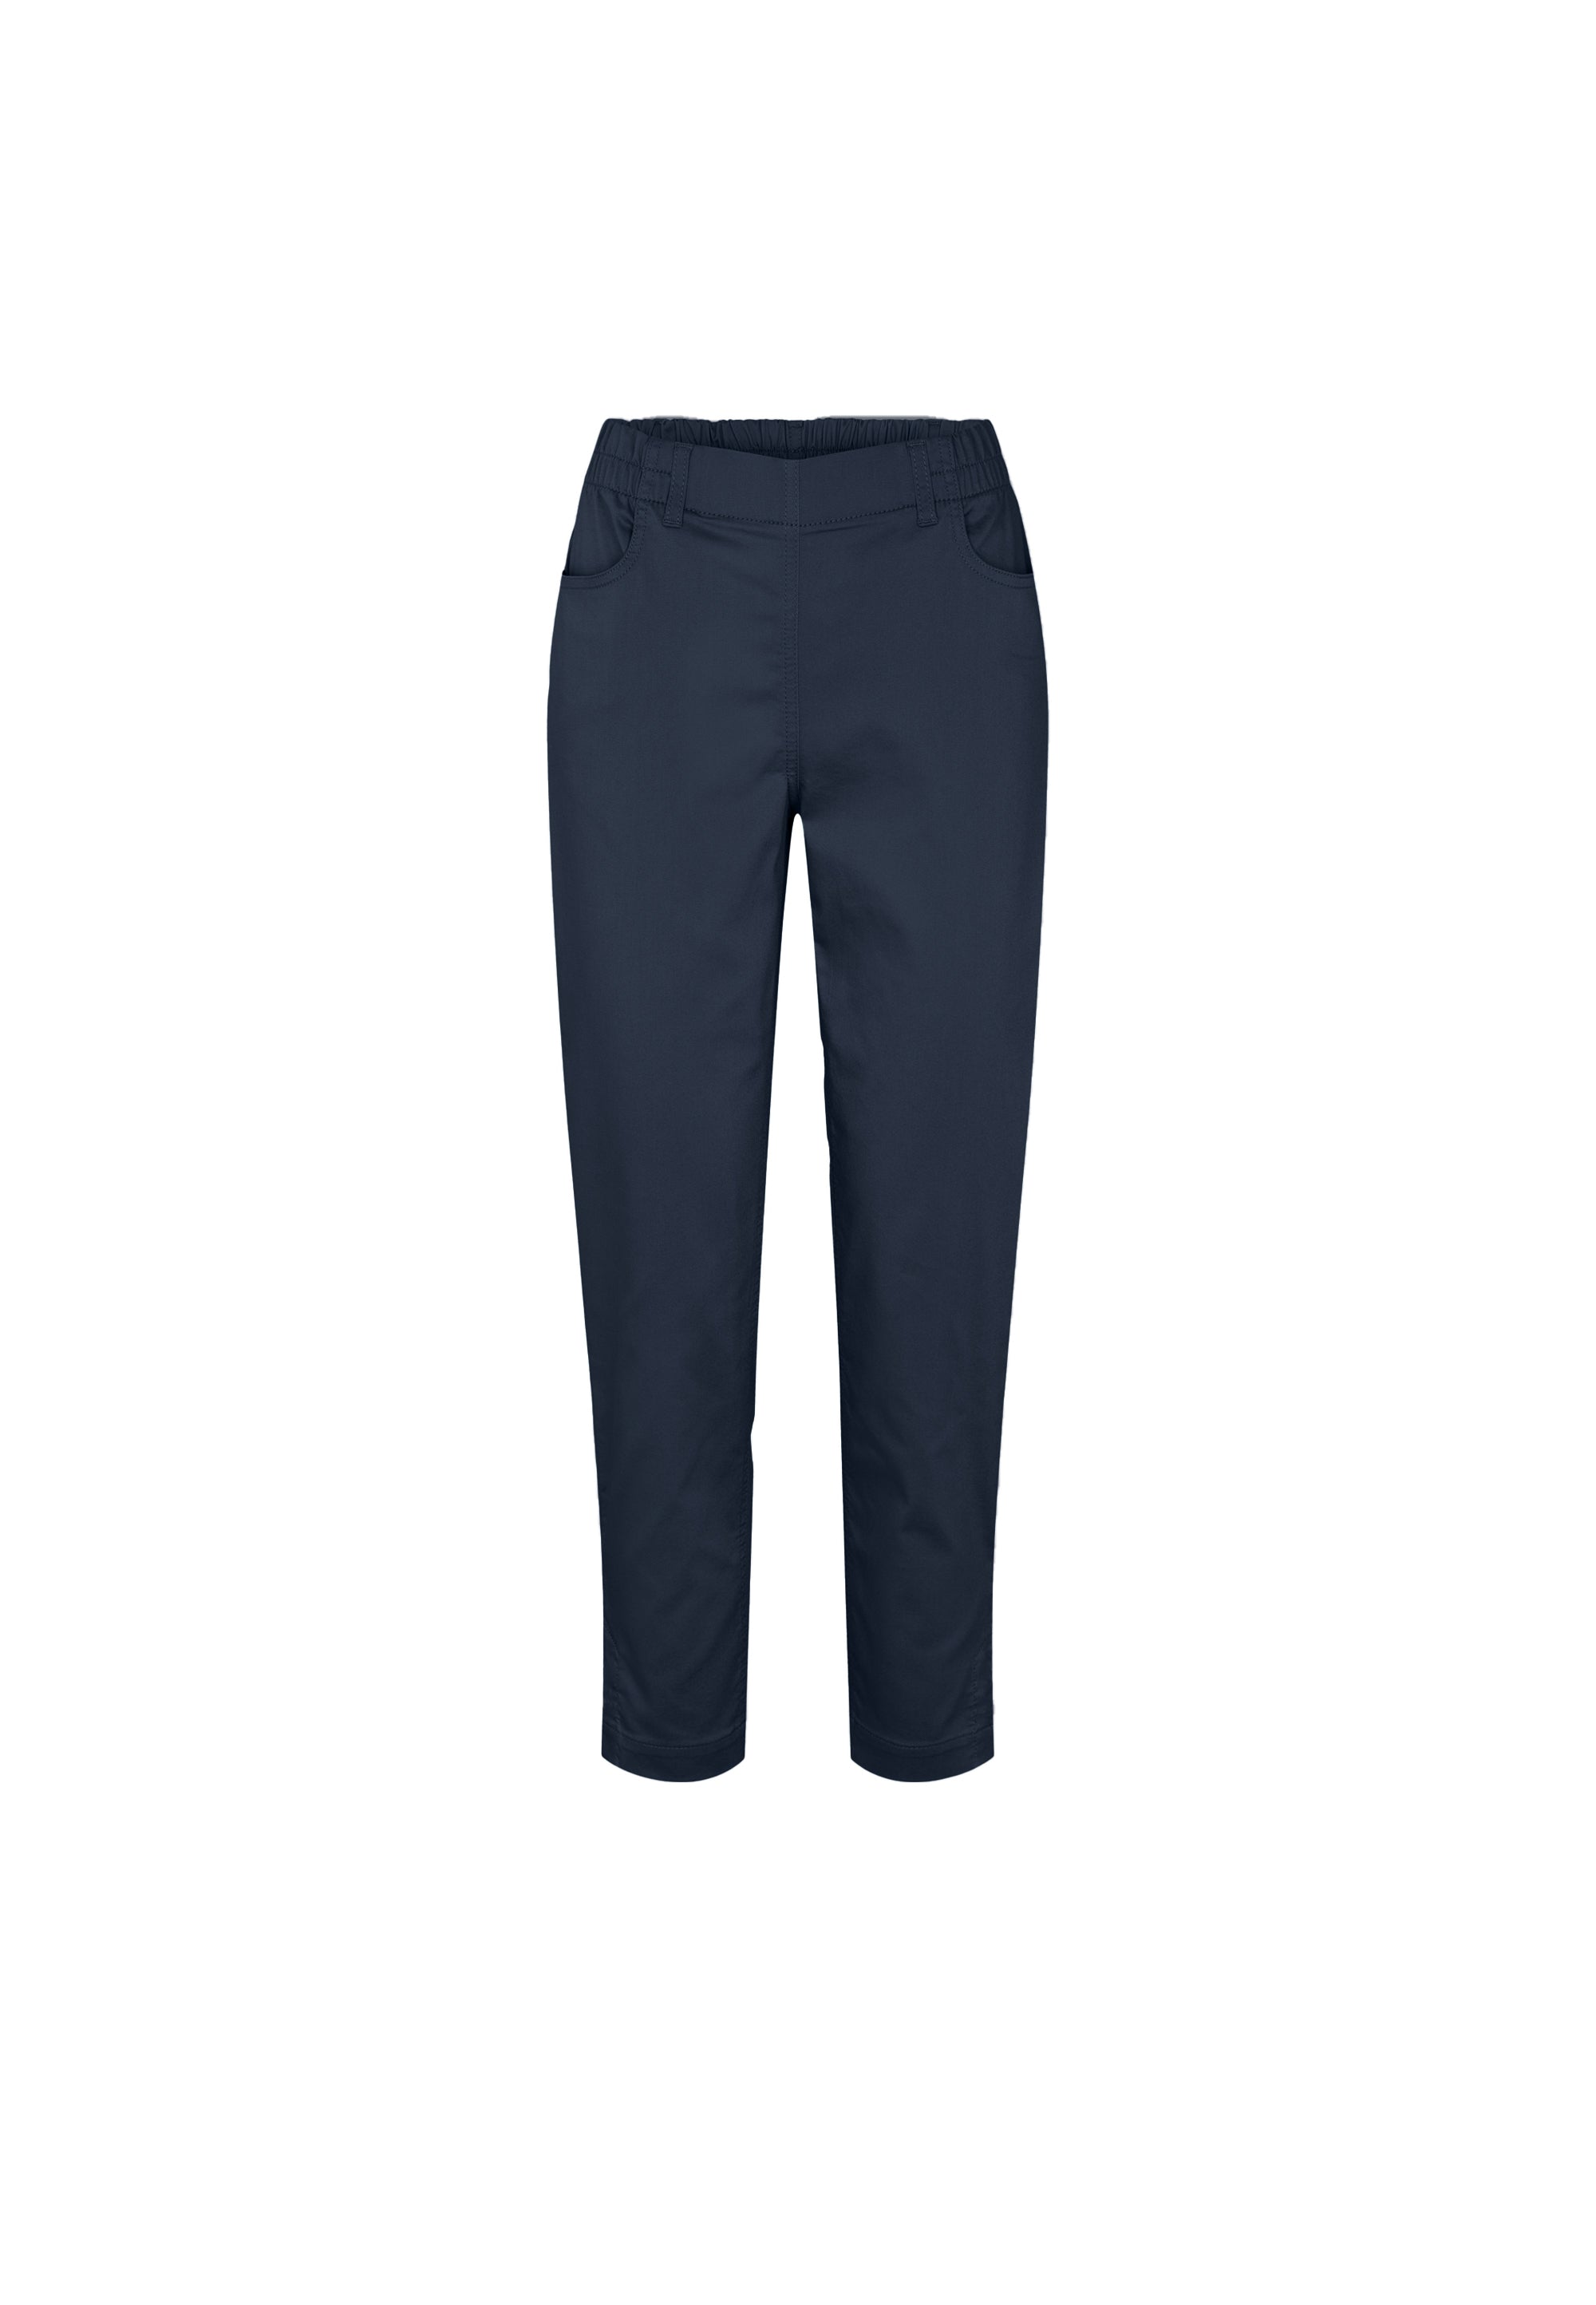 LAURIE  Ellie Relaxed - Extra Short Length Trousers RELAXED Marine